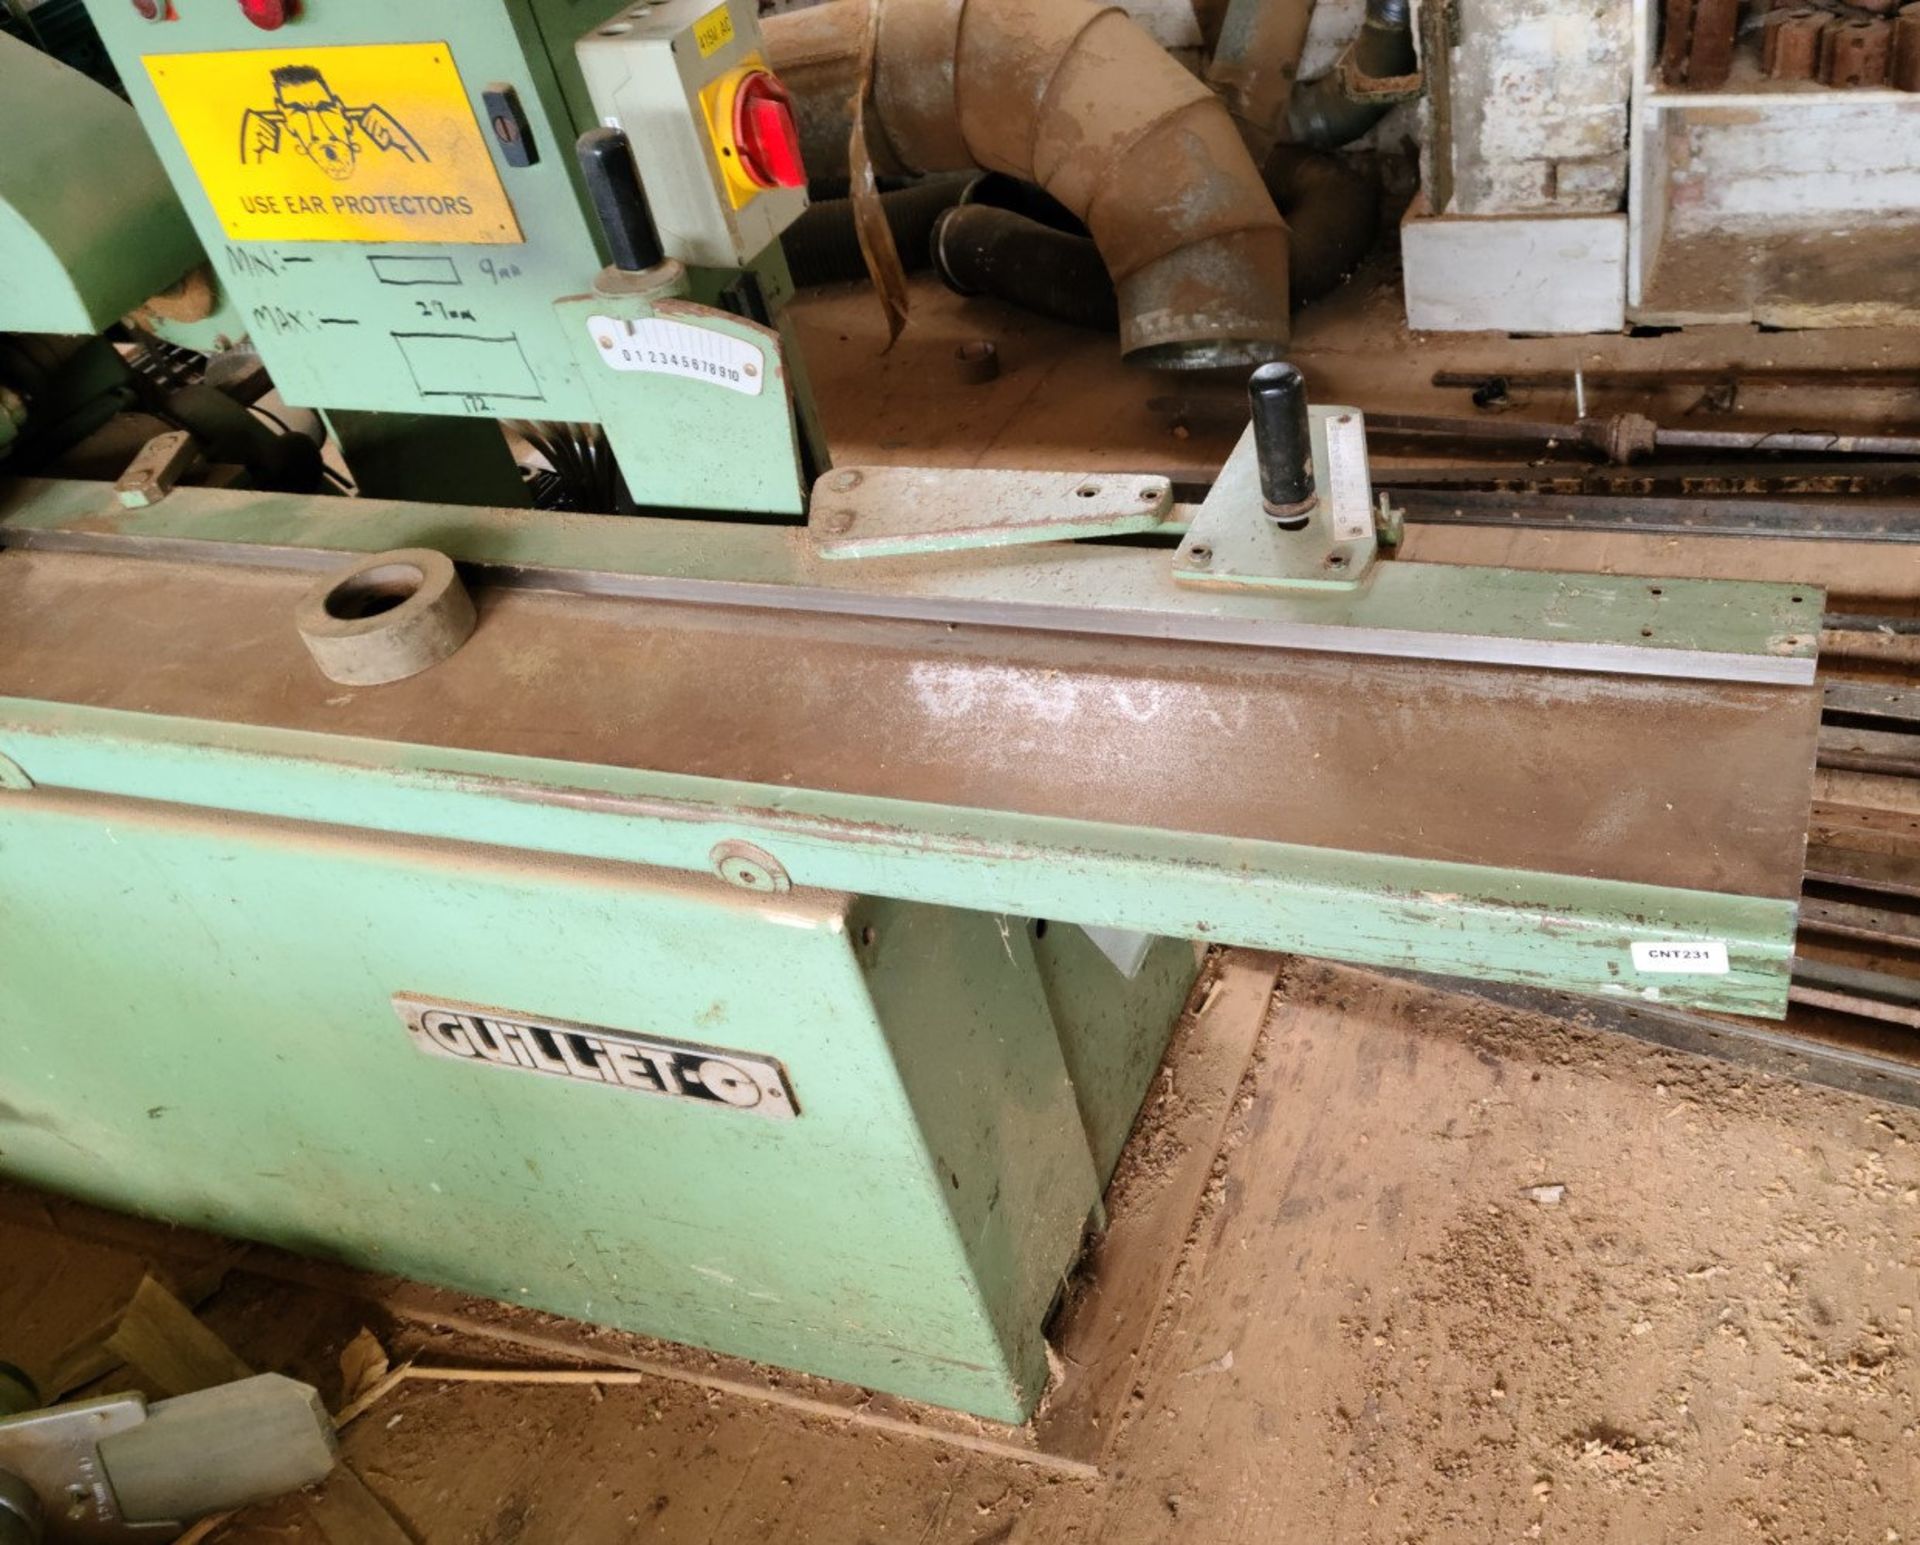 1 x Guilliet 4-Sided Planer With a 1.8m Straightening Table - Ref: CNT231 - CL846 - Location: Oxfor - Image 5 of 12